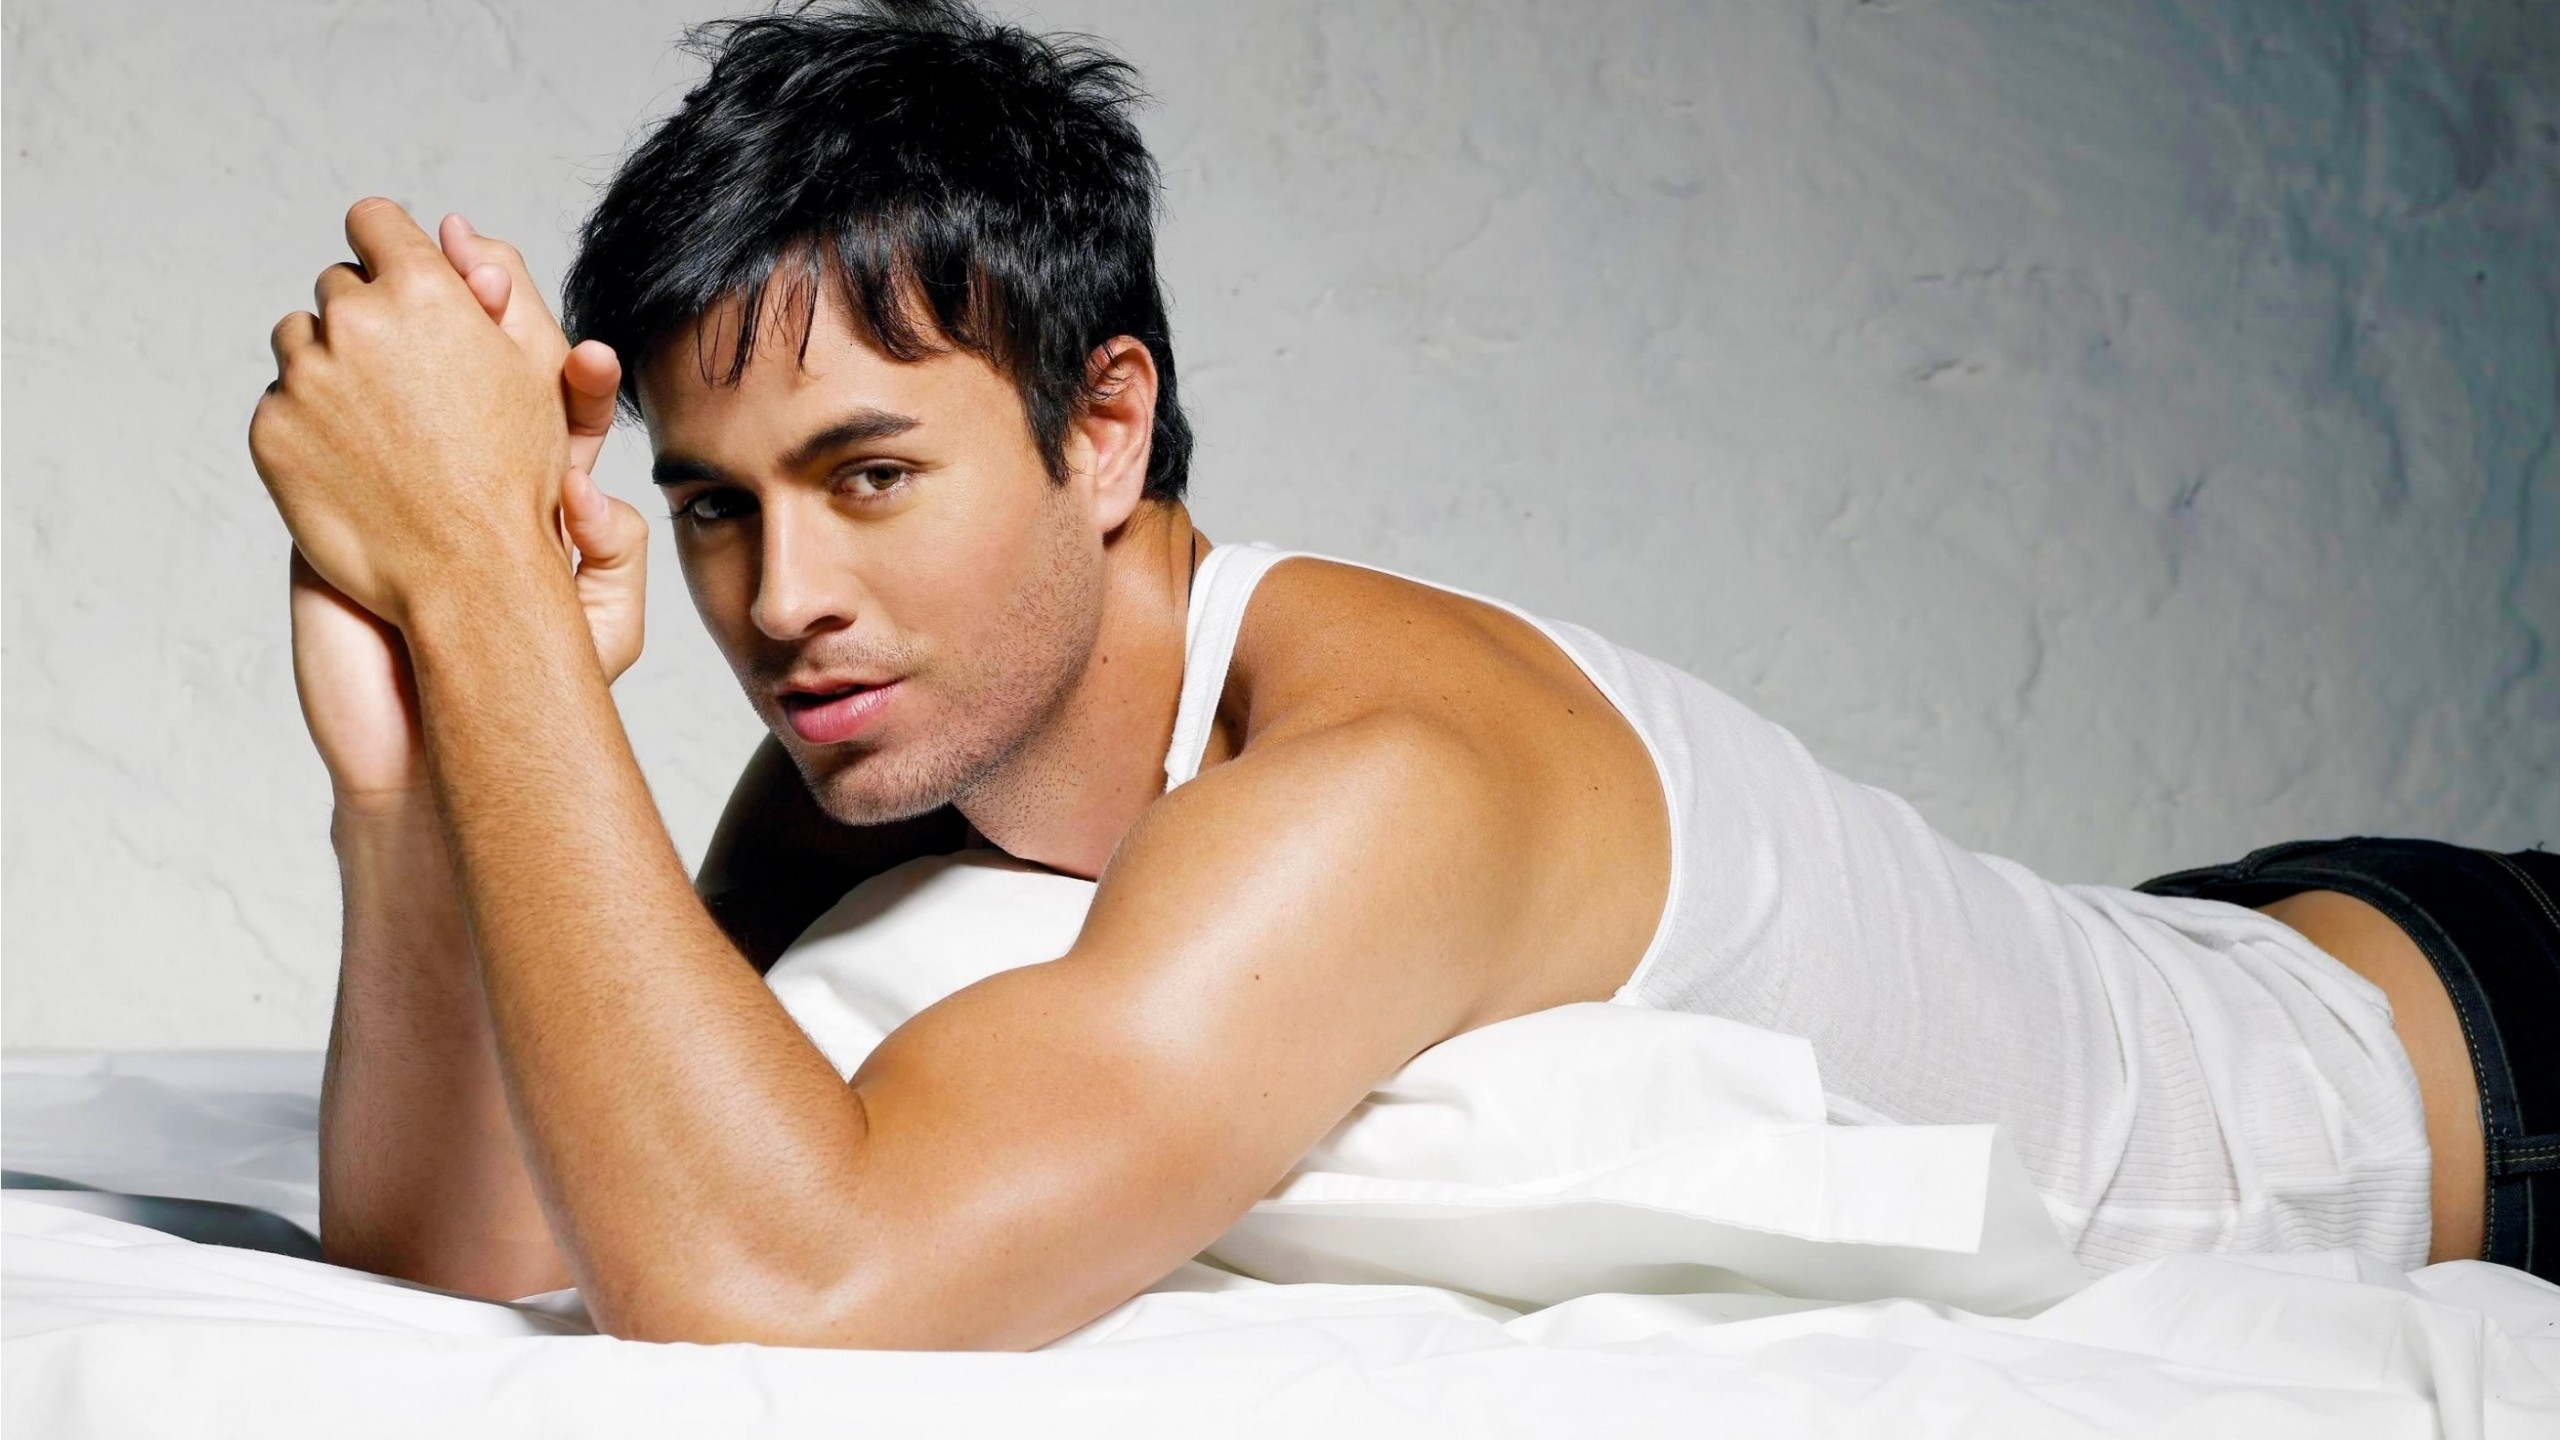 Enrique Iglesias in Bed for 2560x1440 HDTV resolution